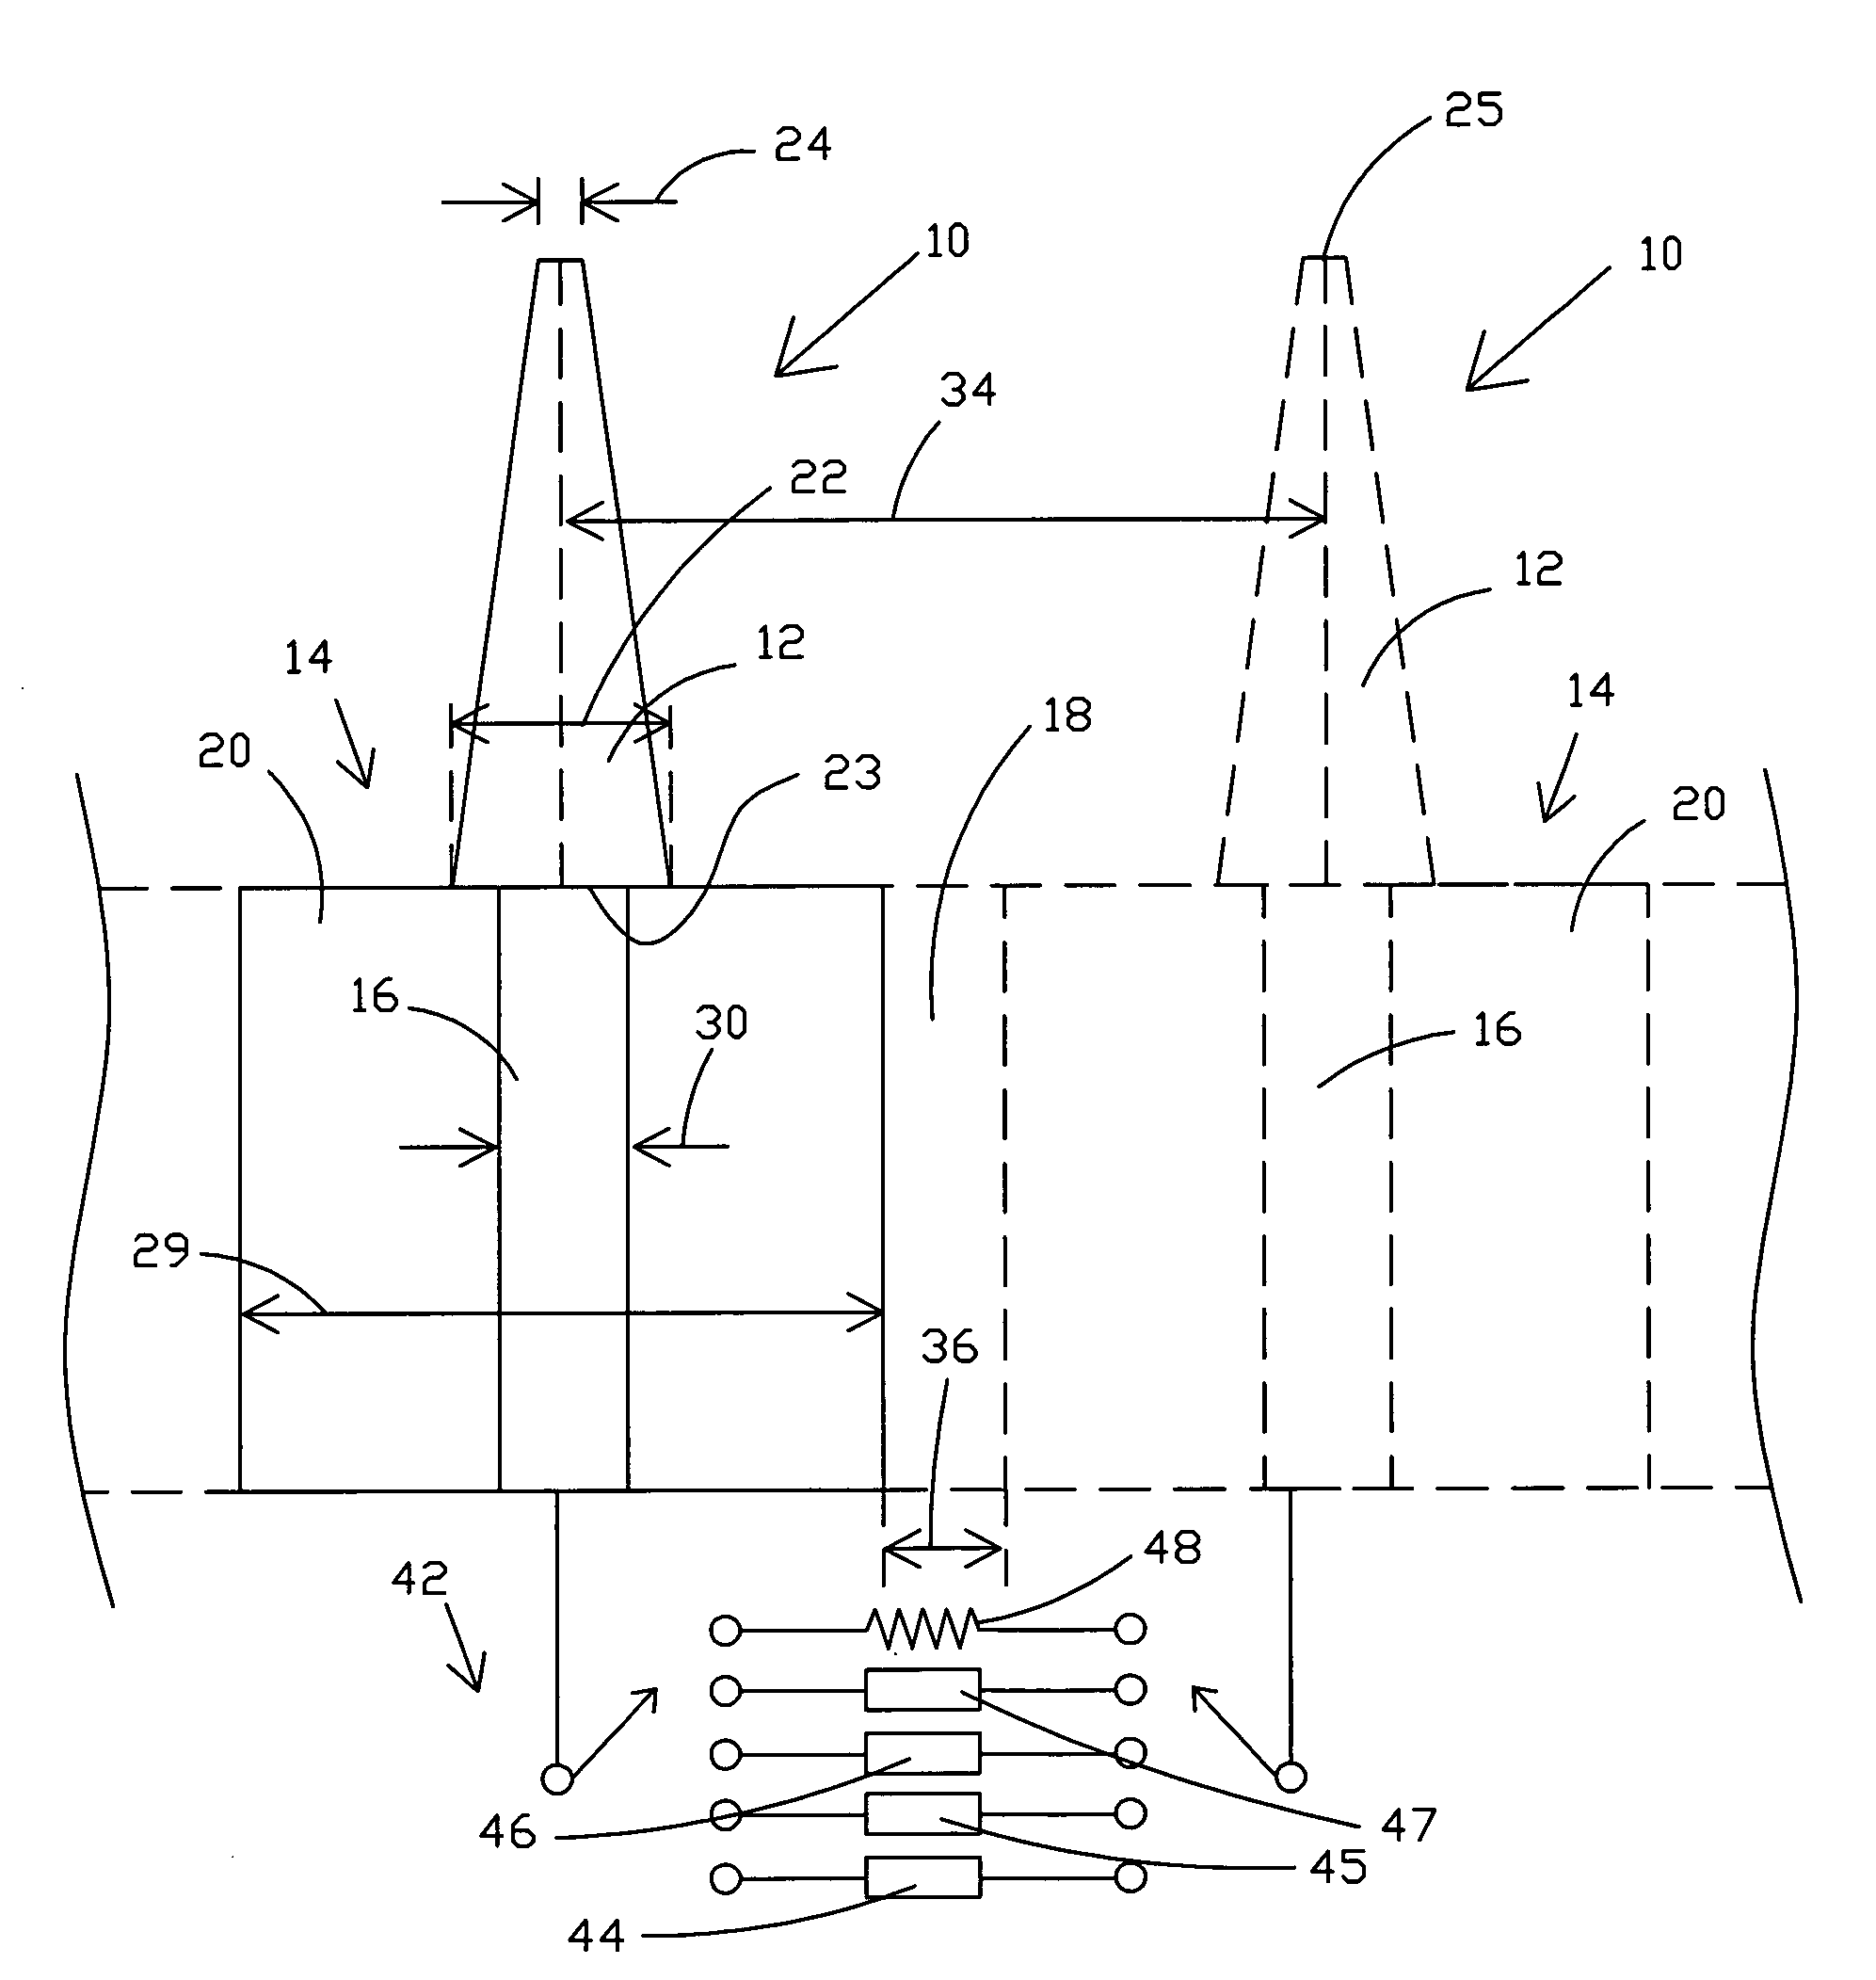 Multi-purpose electromagnetic radiation interface system and method